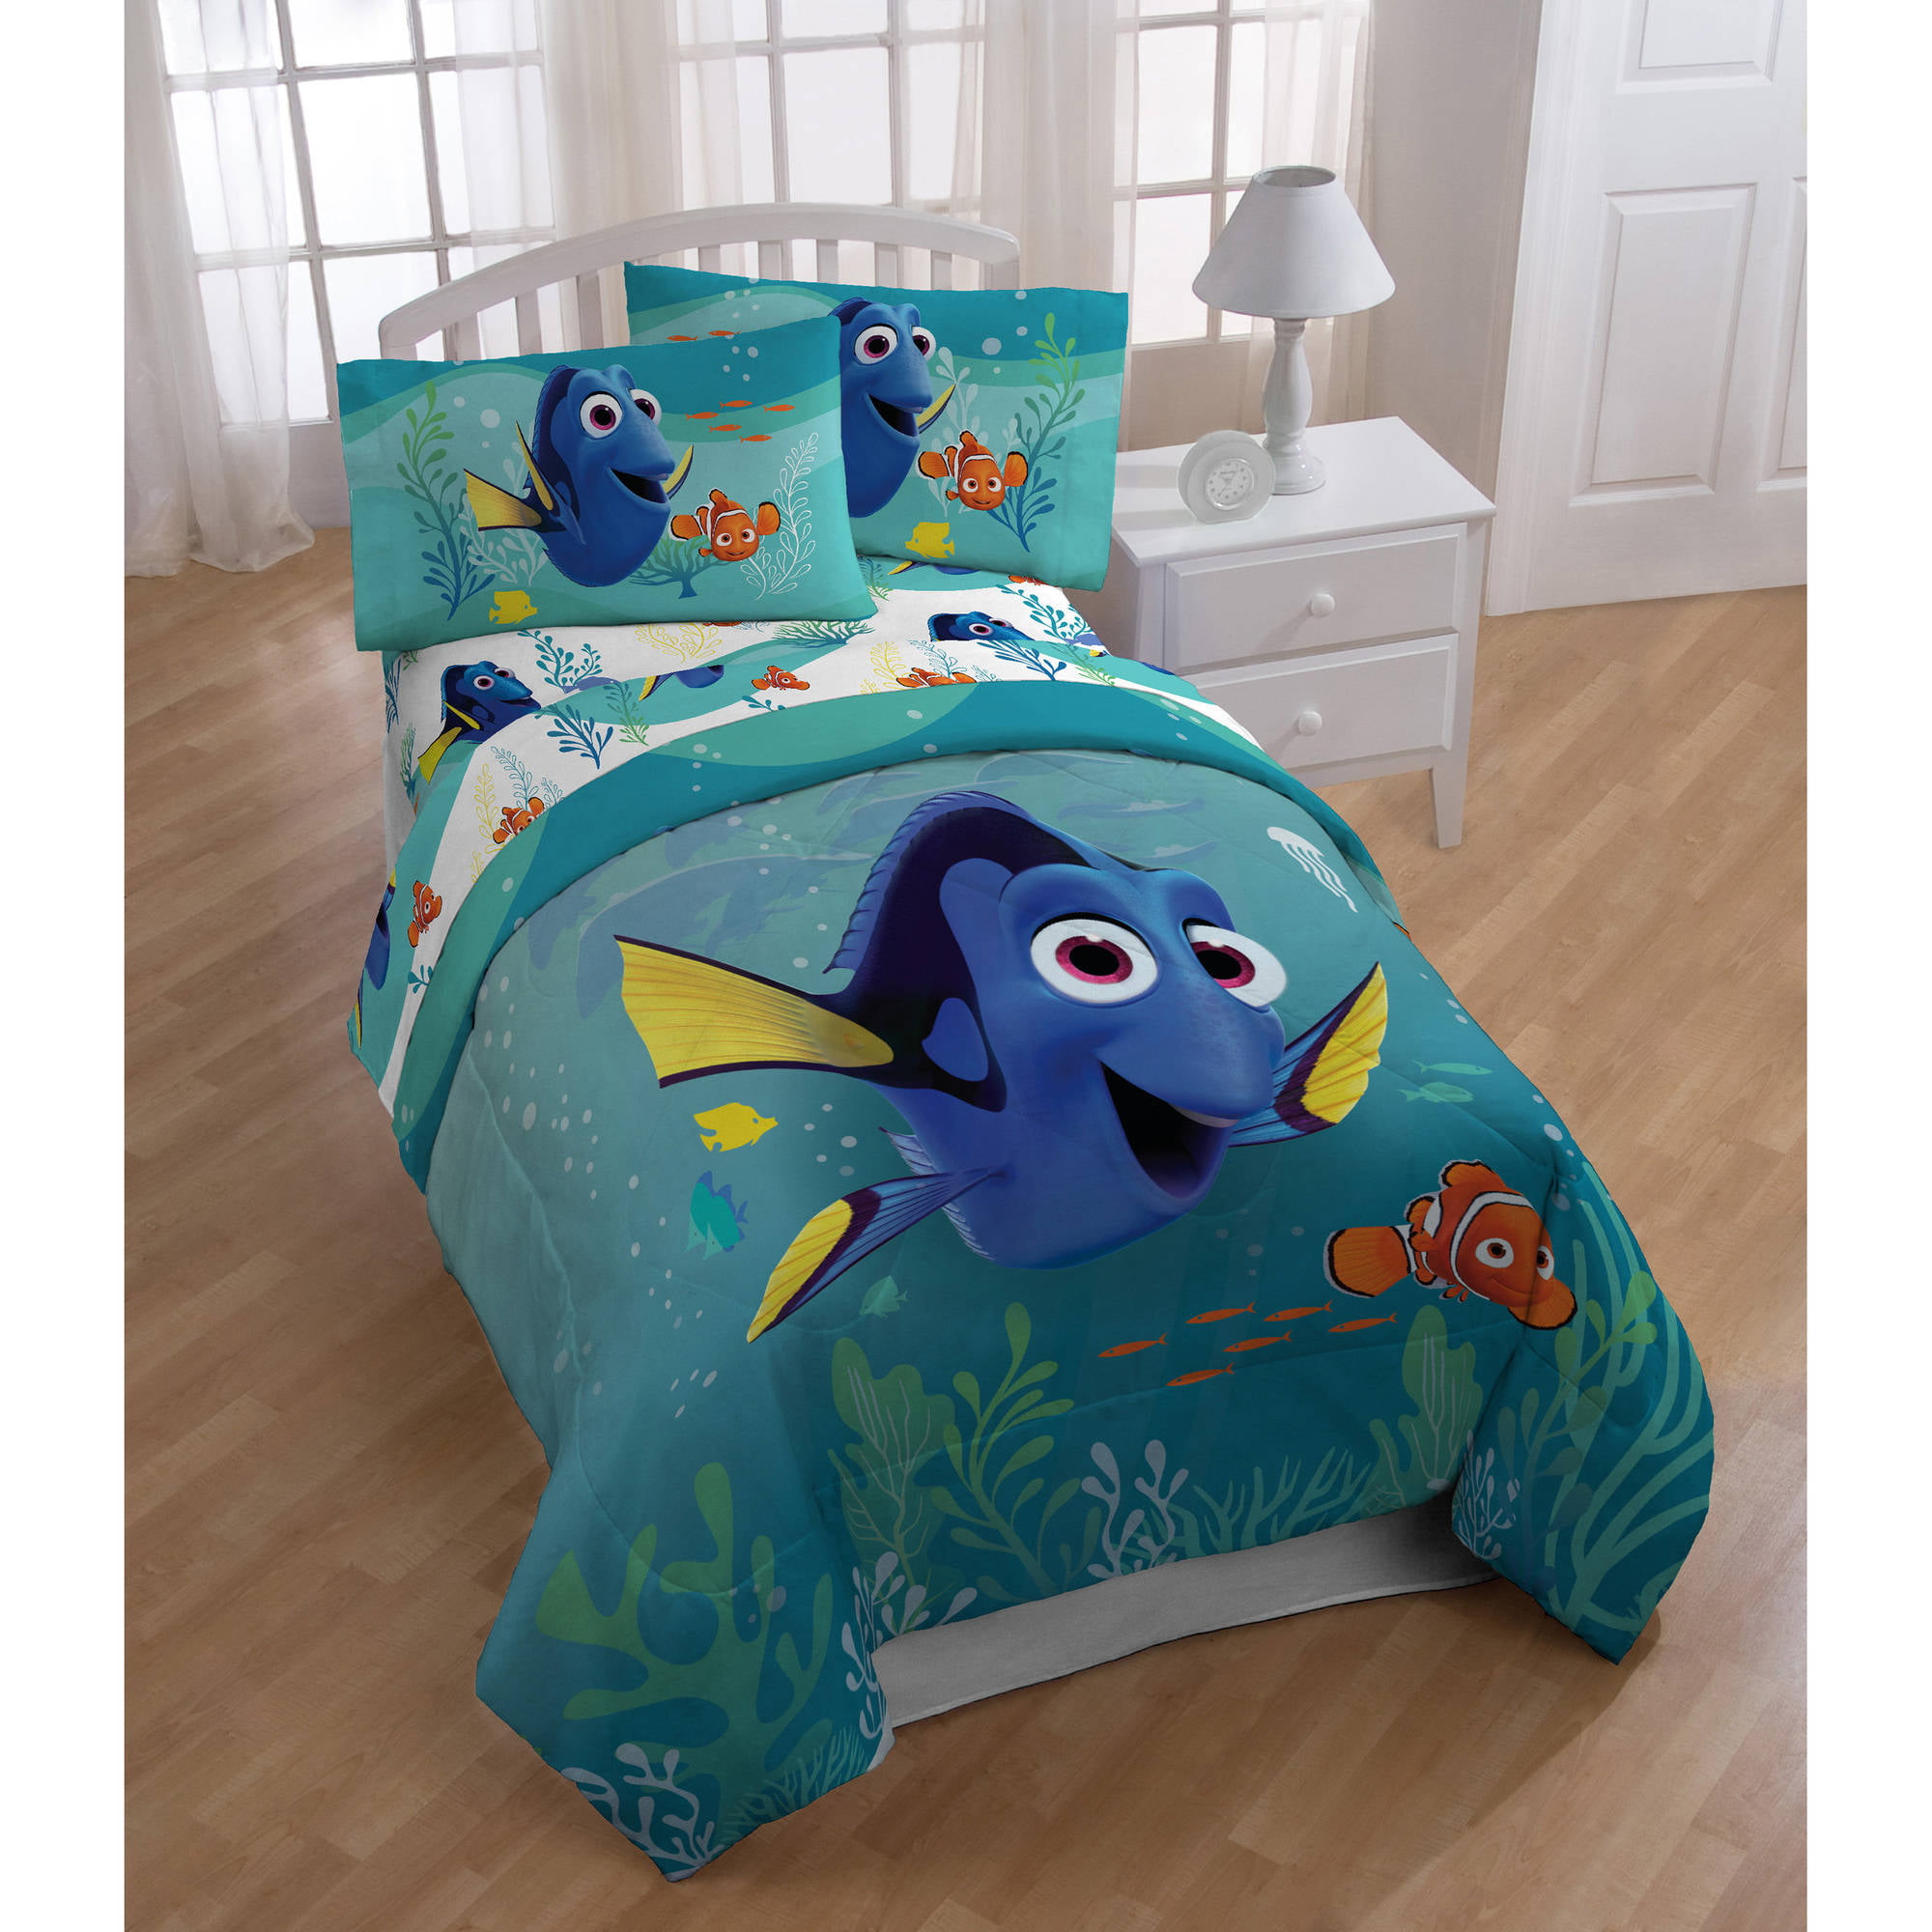 Finding Dory Twin Kids Comforter Sheet Set 4 Piece Bed In A Bag